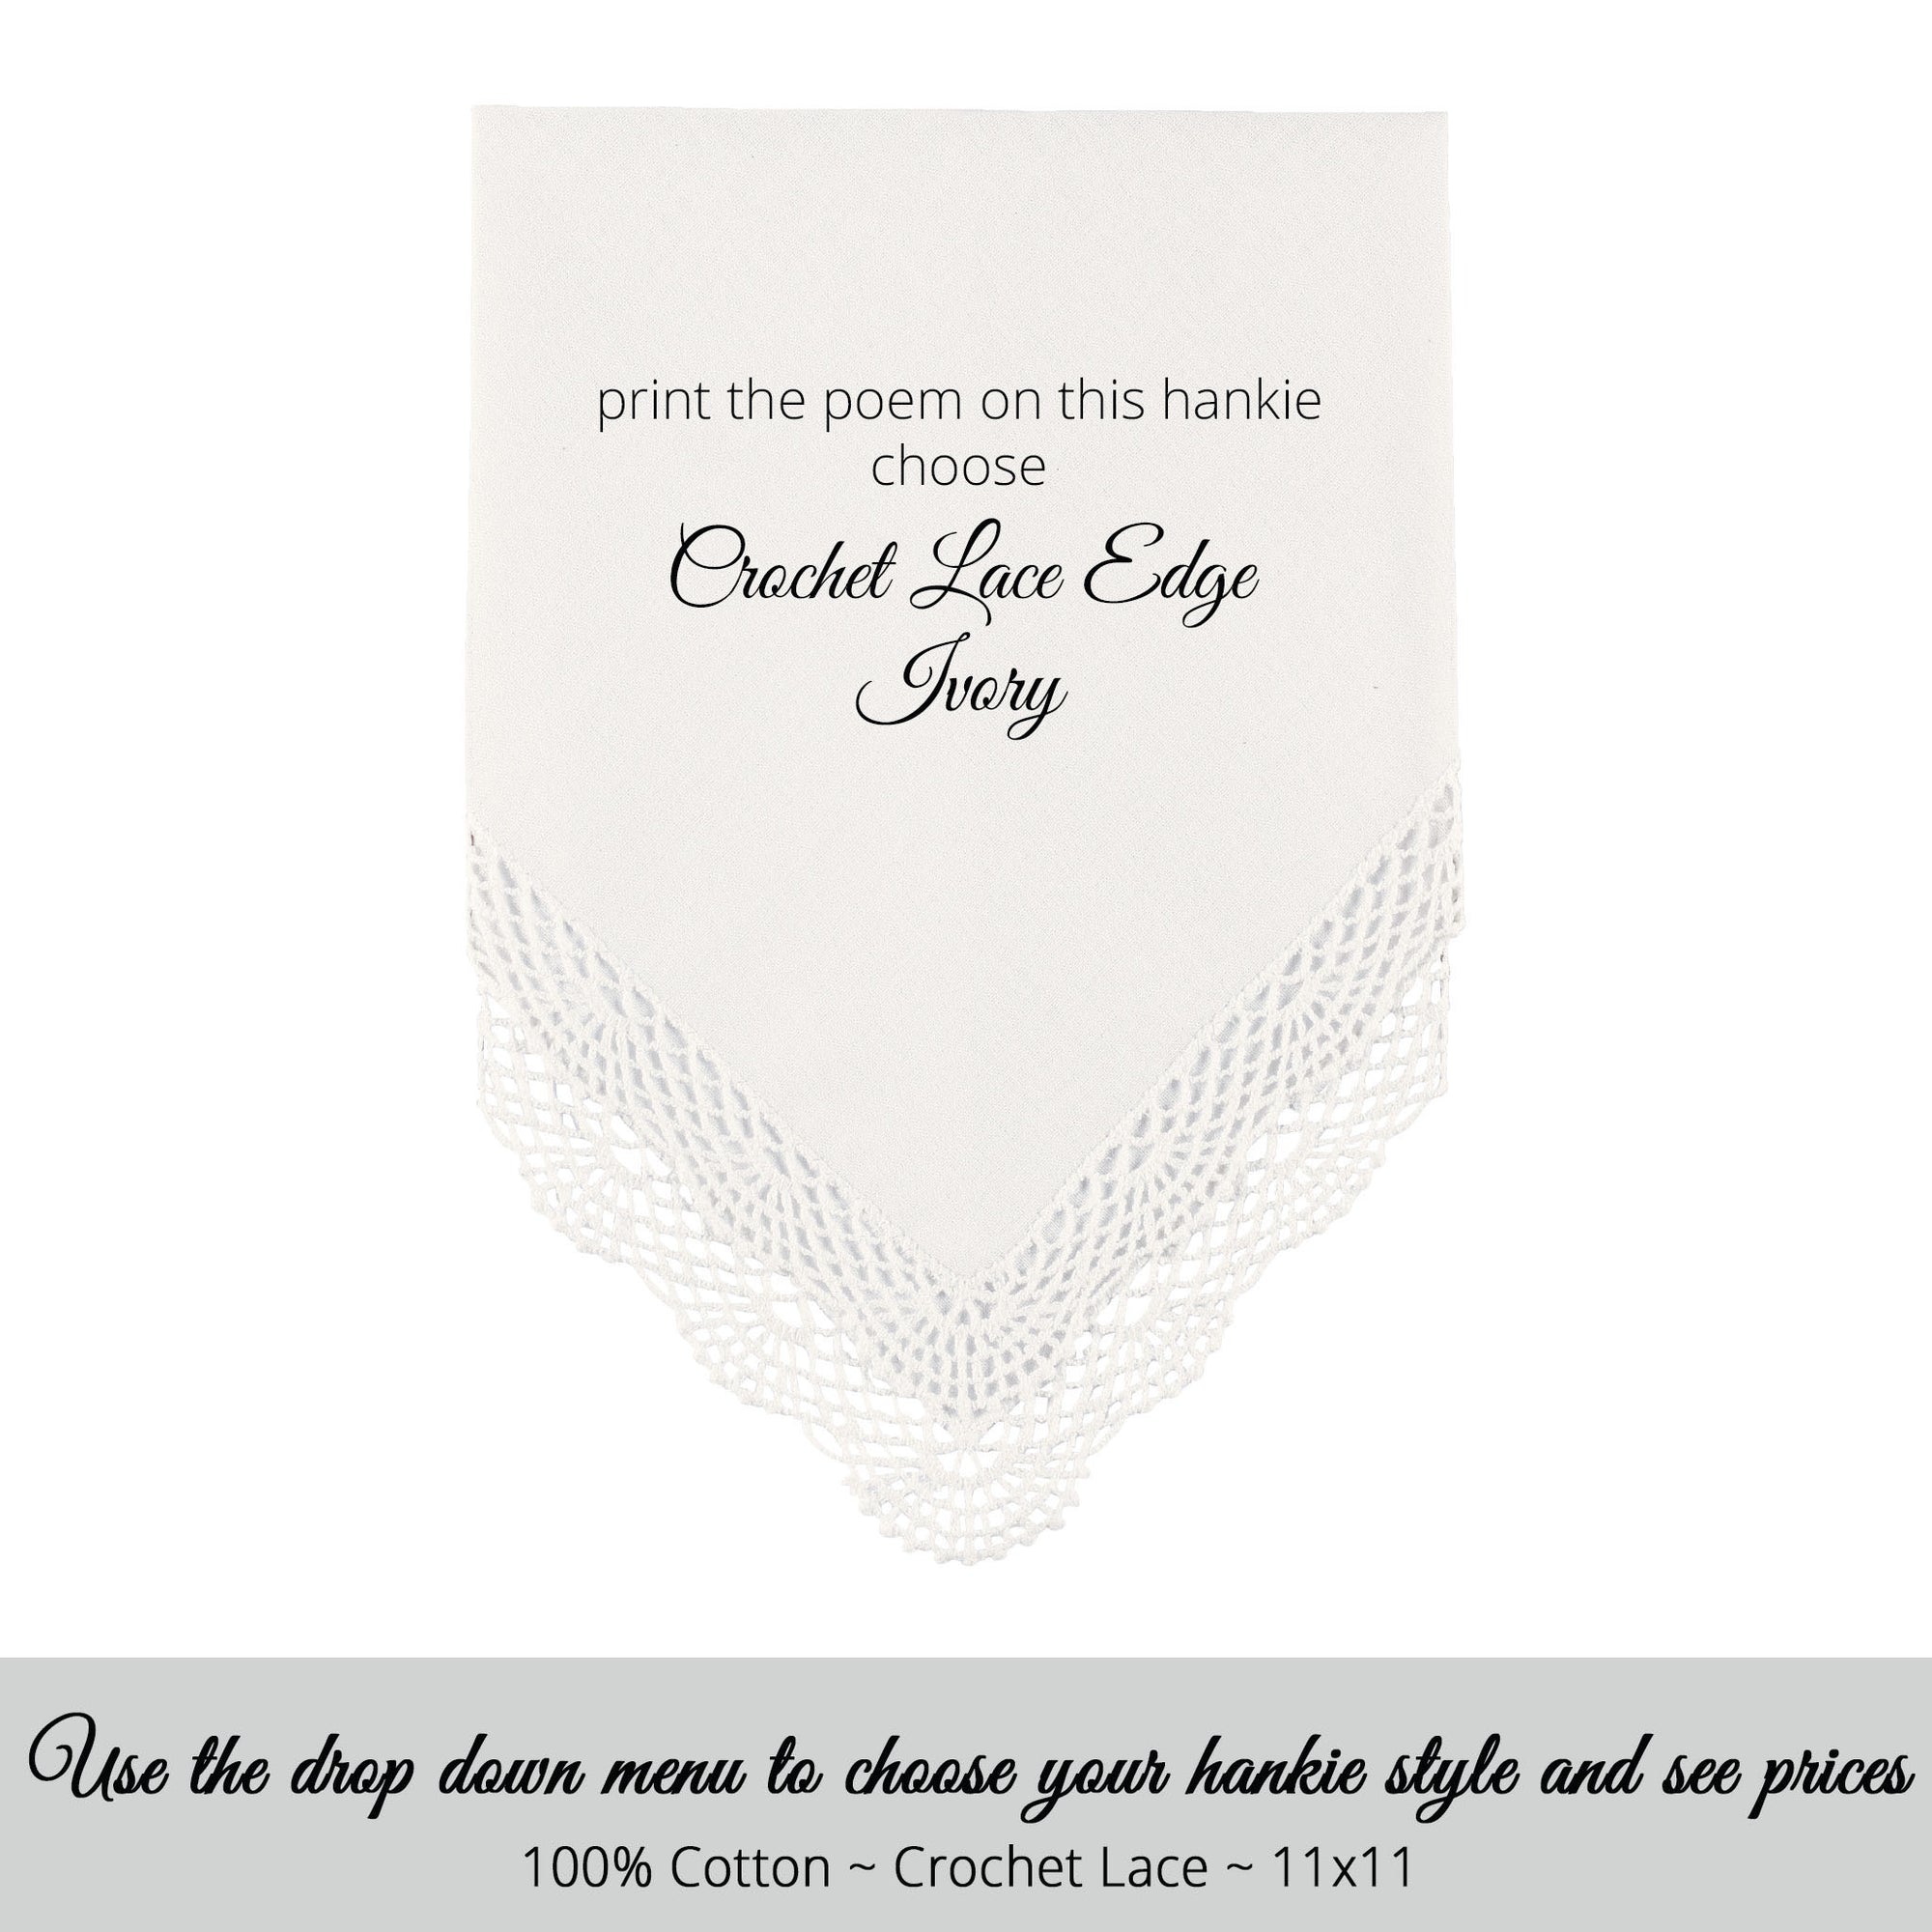 Wedding handkerchief ivory with crochet lace edge for personalized hankie for the bride